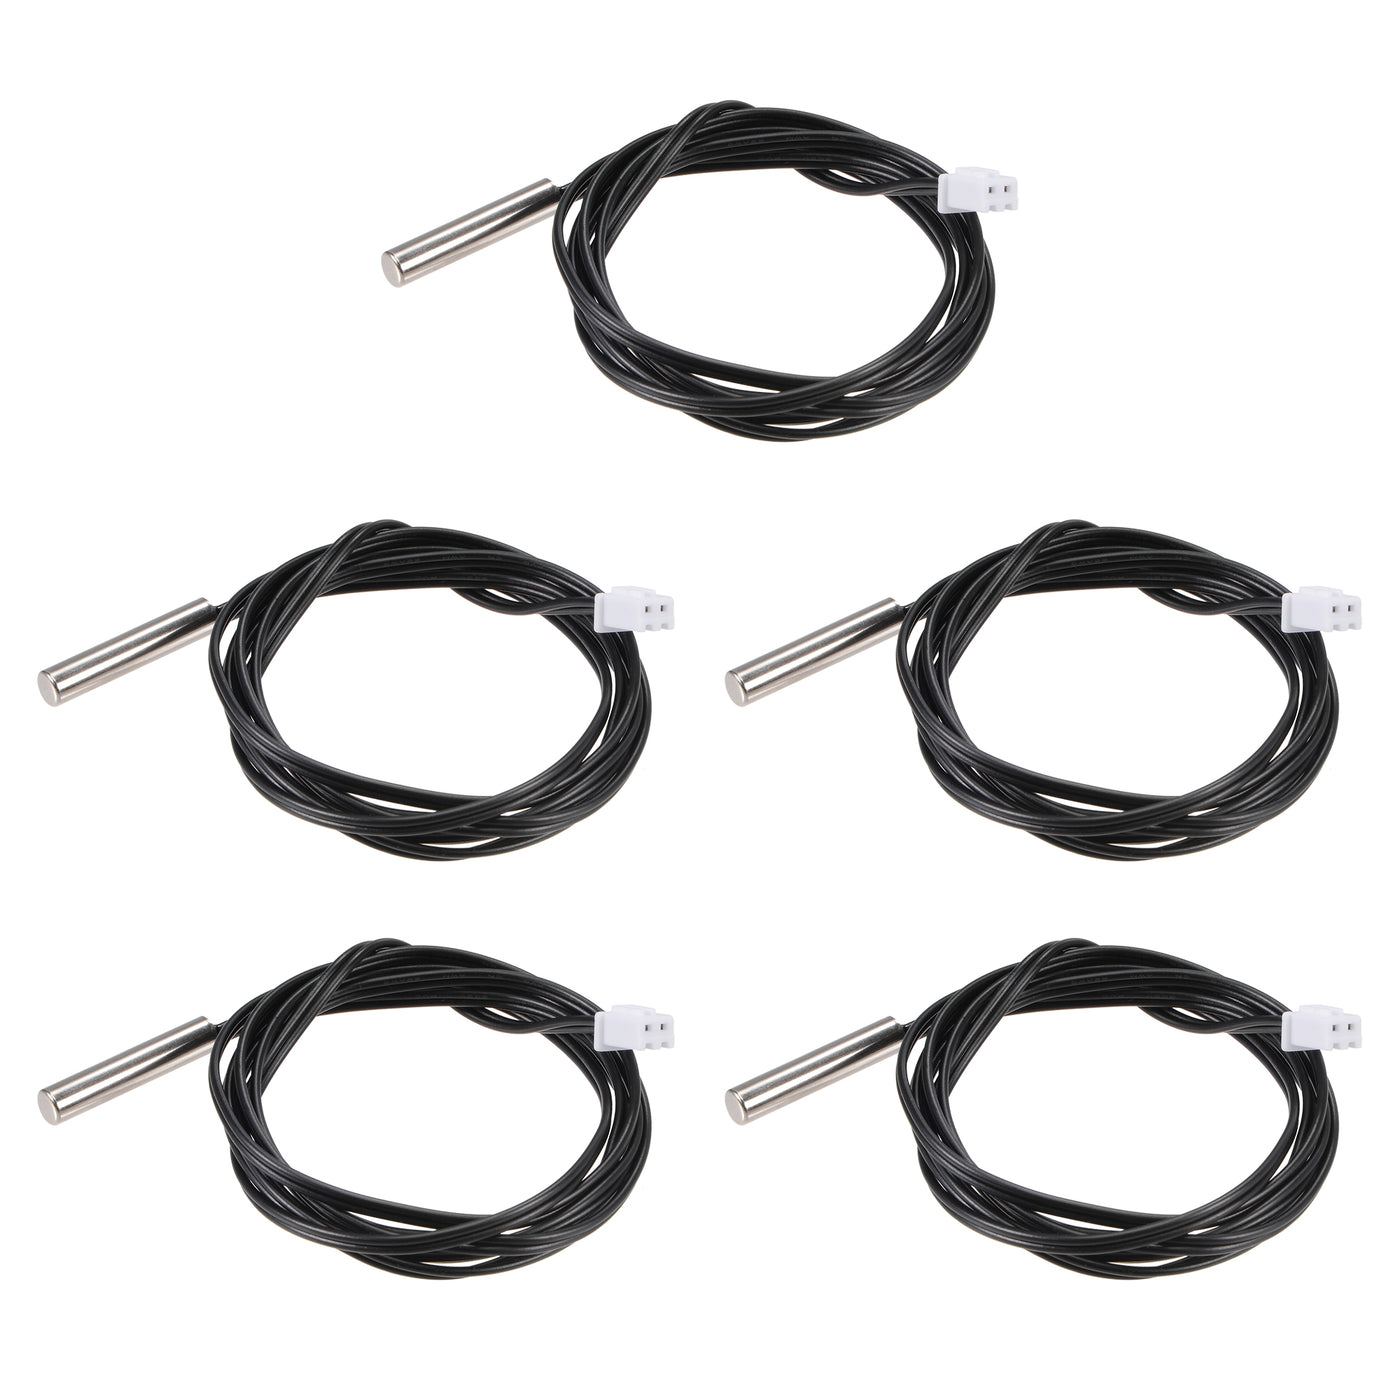 uxcell Uxcell 5pcs 5K Temperature Sensor Probe, Stainless Steel NTC Thermal Sensor Probe 3.3ft Digital Thermometer Extension Cable